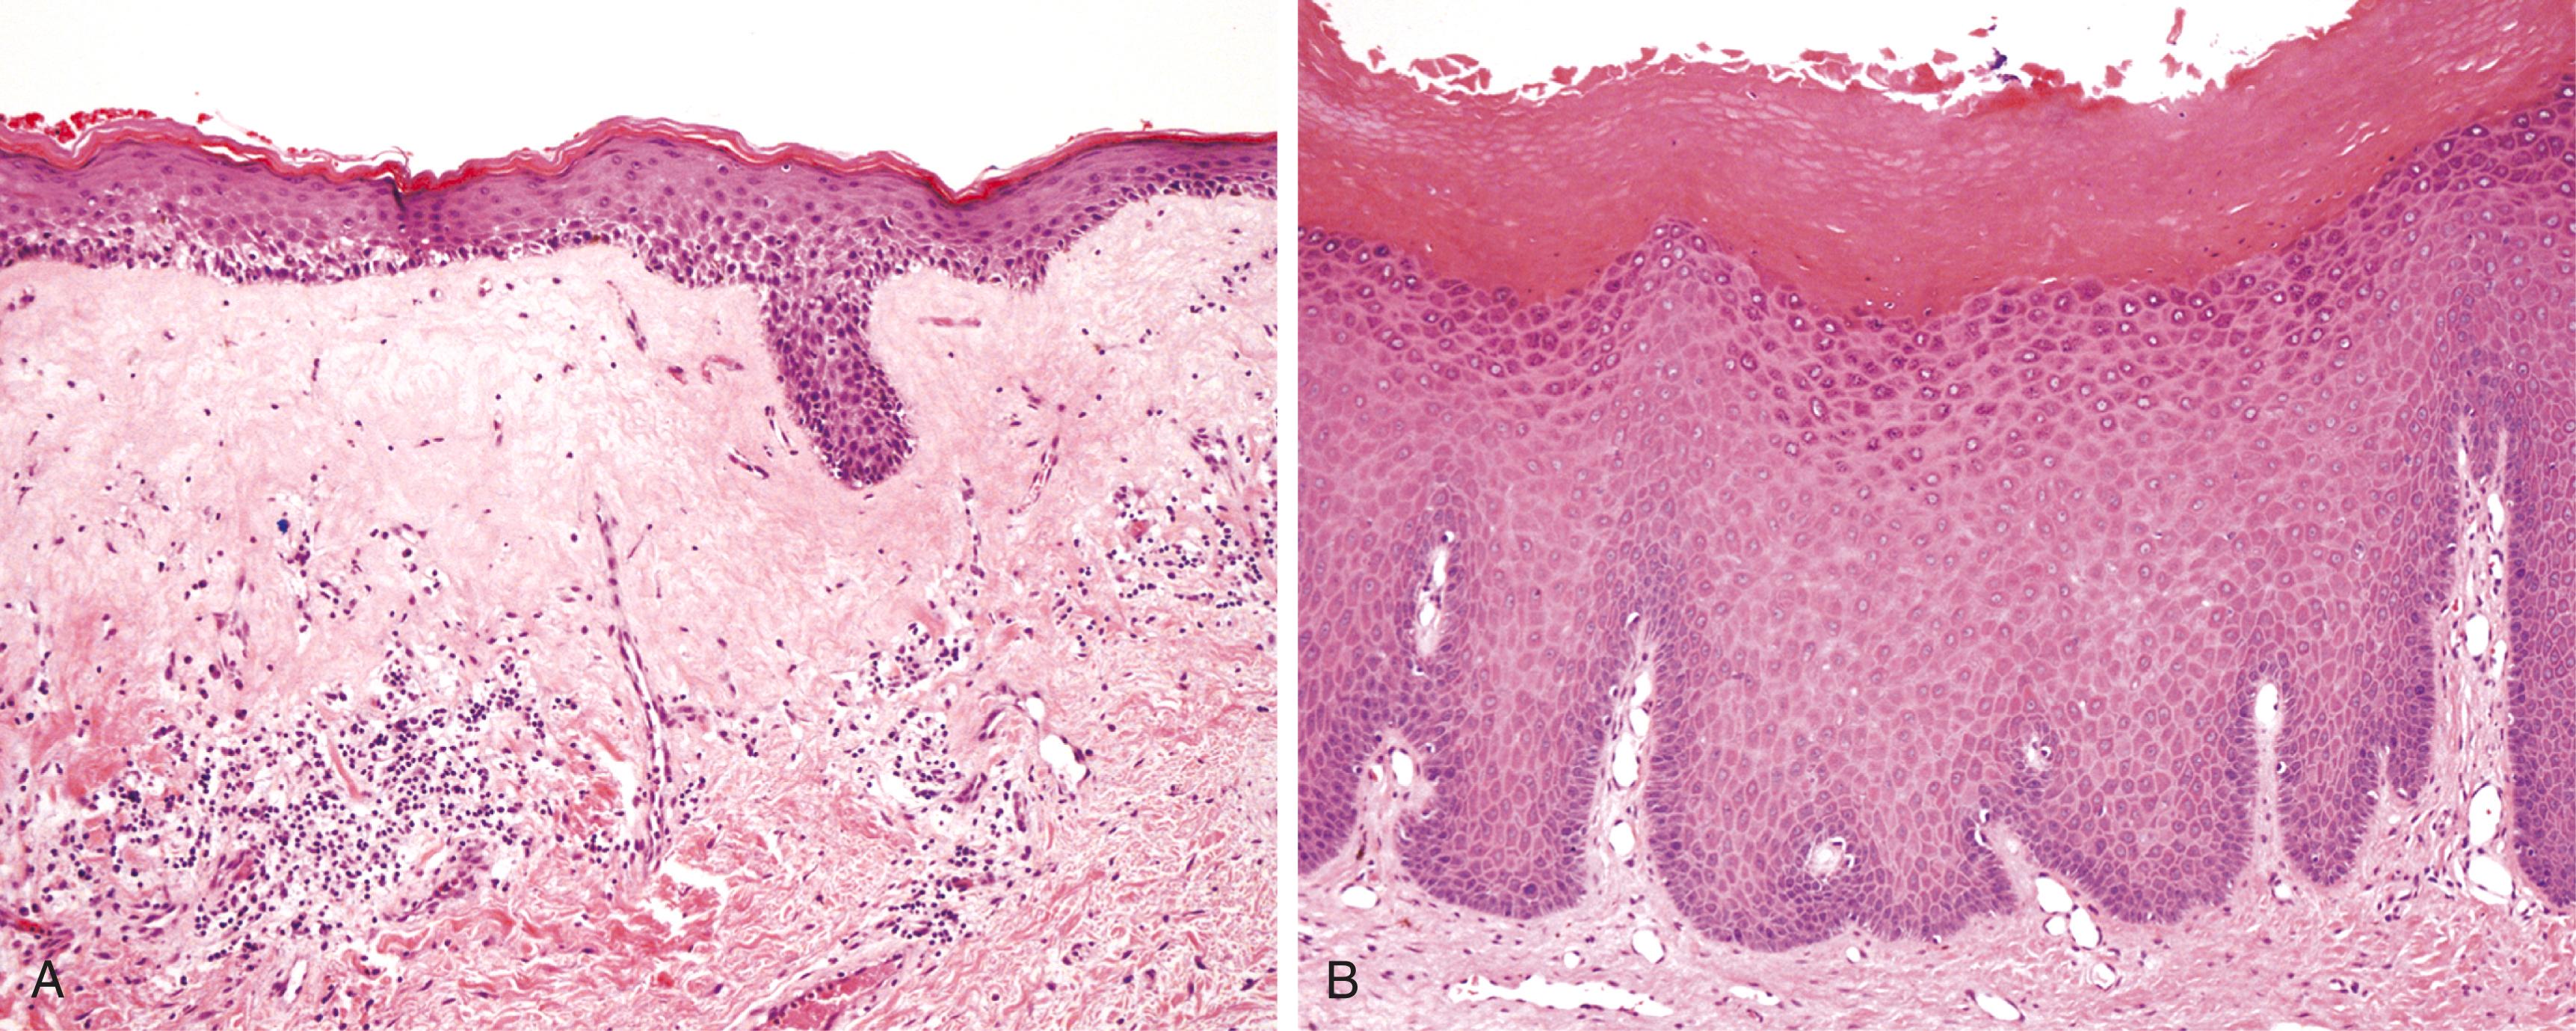 FIG. 17.1, Nonneoplastic vulvar epithelial disorders. (A) Lichen sclerosus. There is marked thinning of the epidermis, fibrosis of the superficial dermis, and chronic inflammatory cells in the deeper dermis. (B) Squamous cell hyperplasia displaying thickened epidermis and hyperkeratosis.